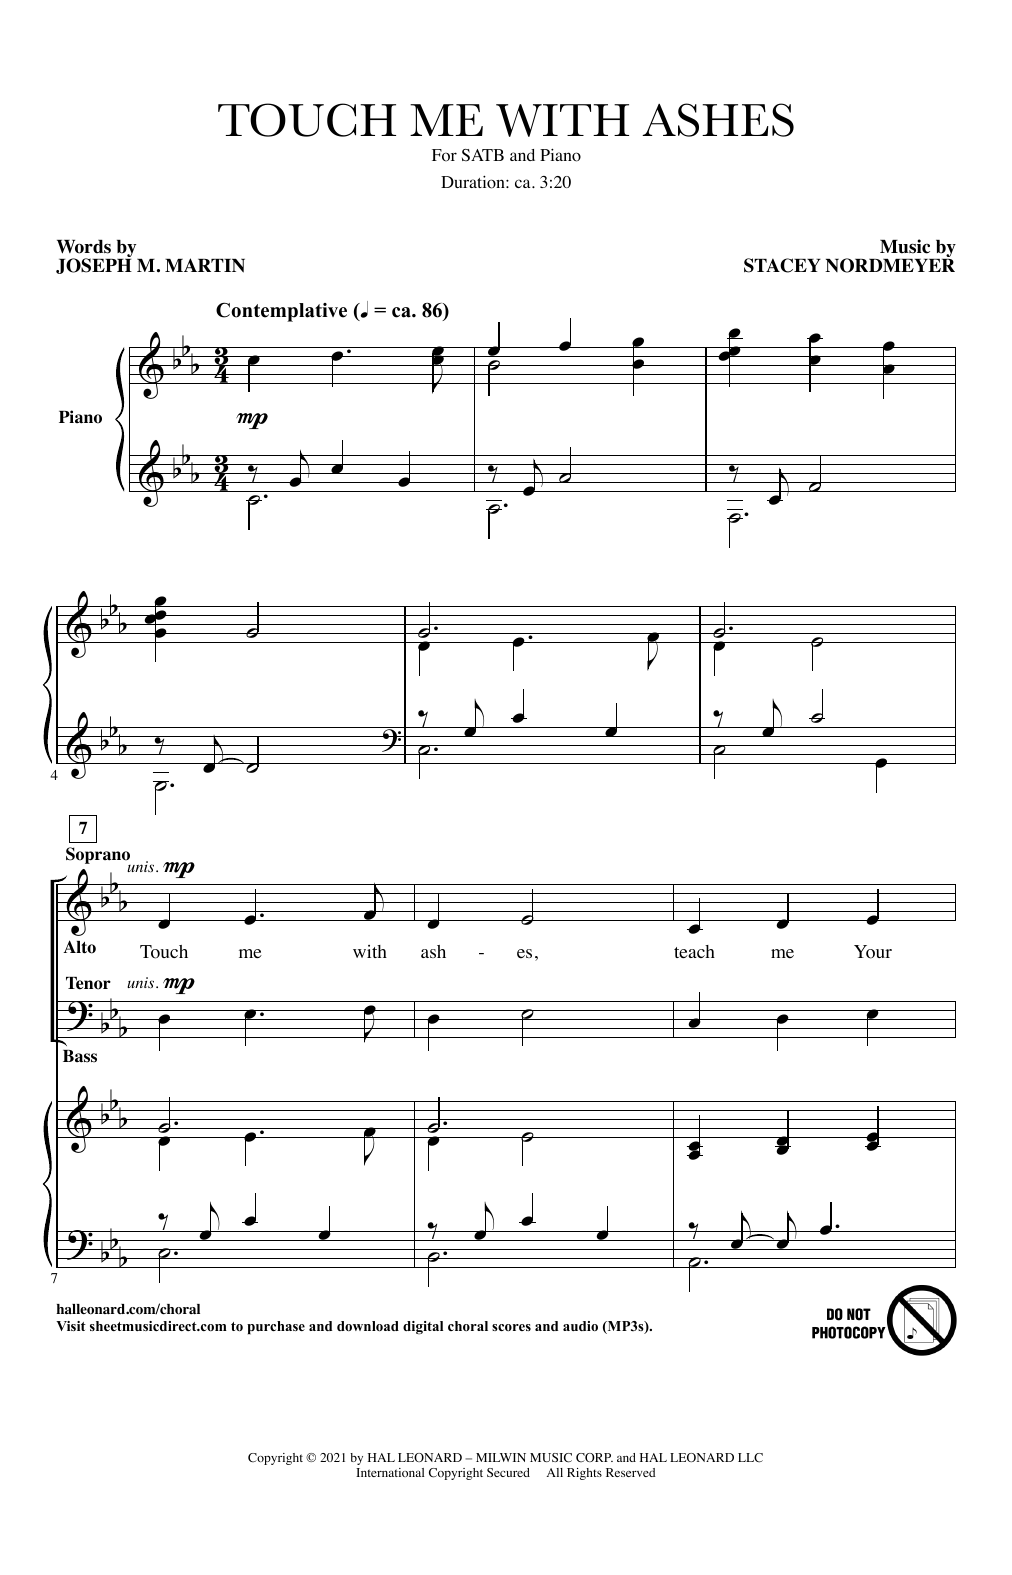 Download Joseph M. Martin and Stacey Nordmeye Touch Me With Ashes Sheet Music